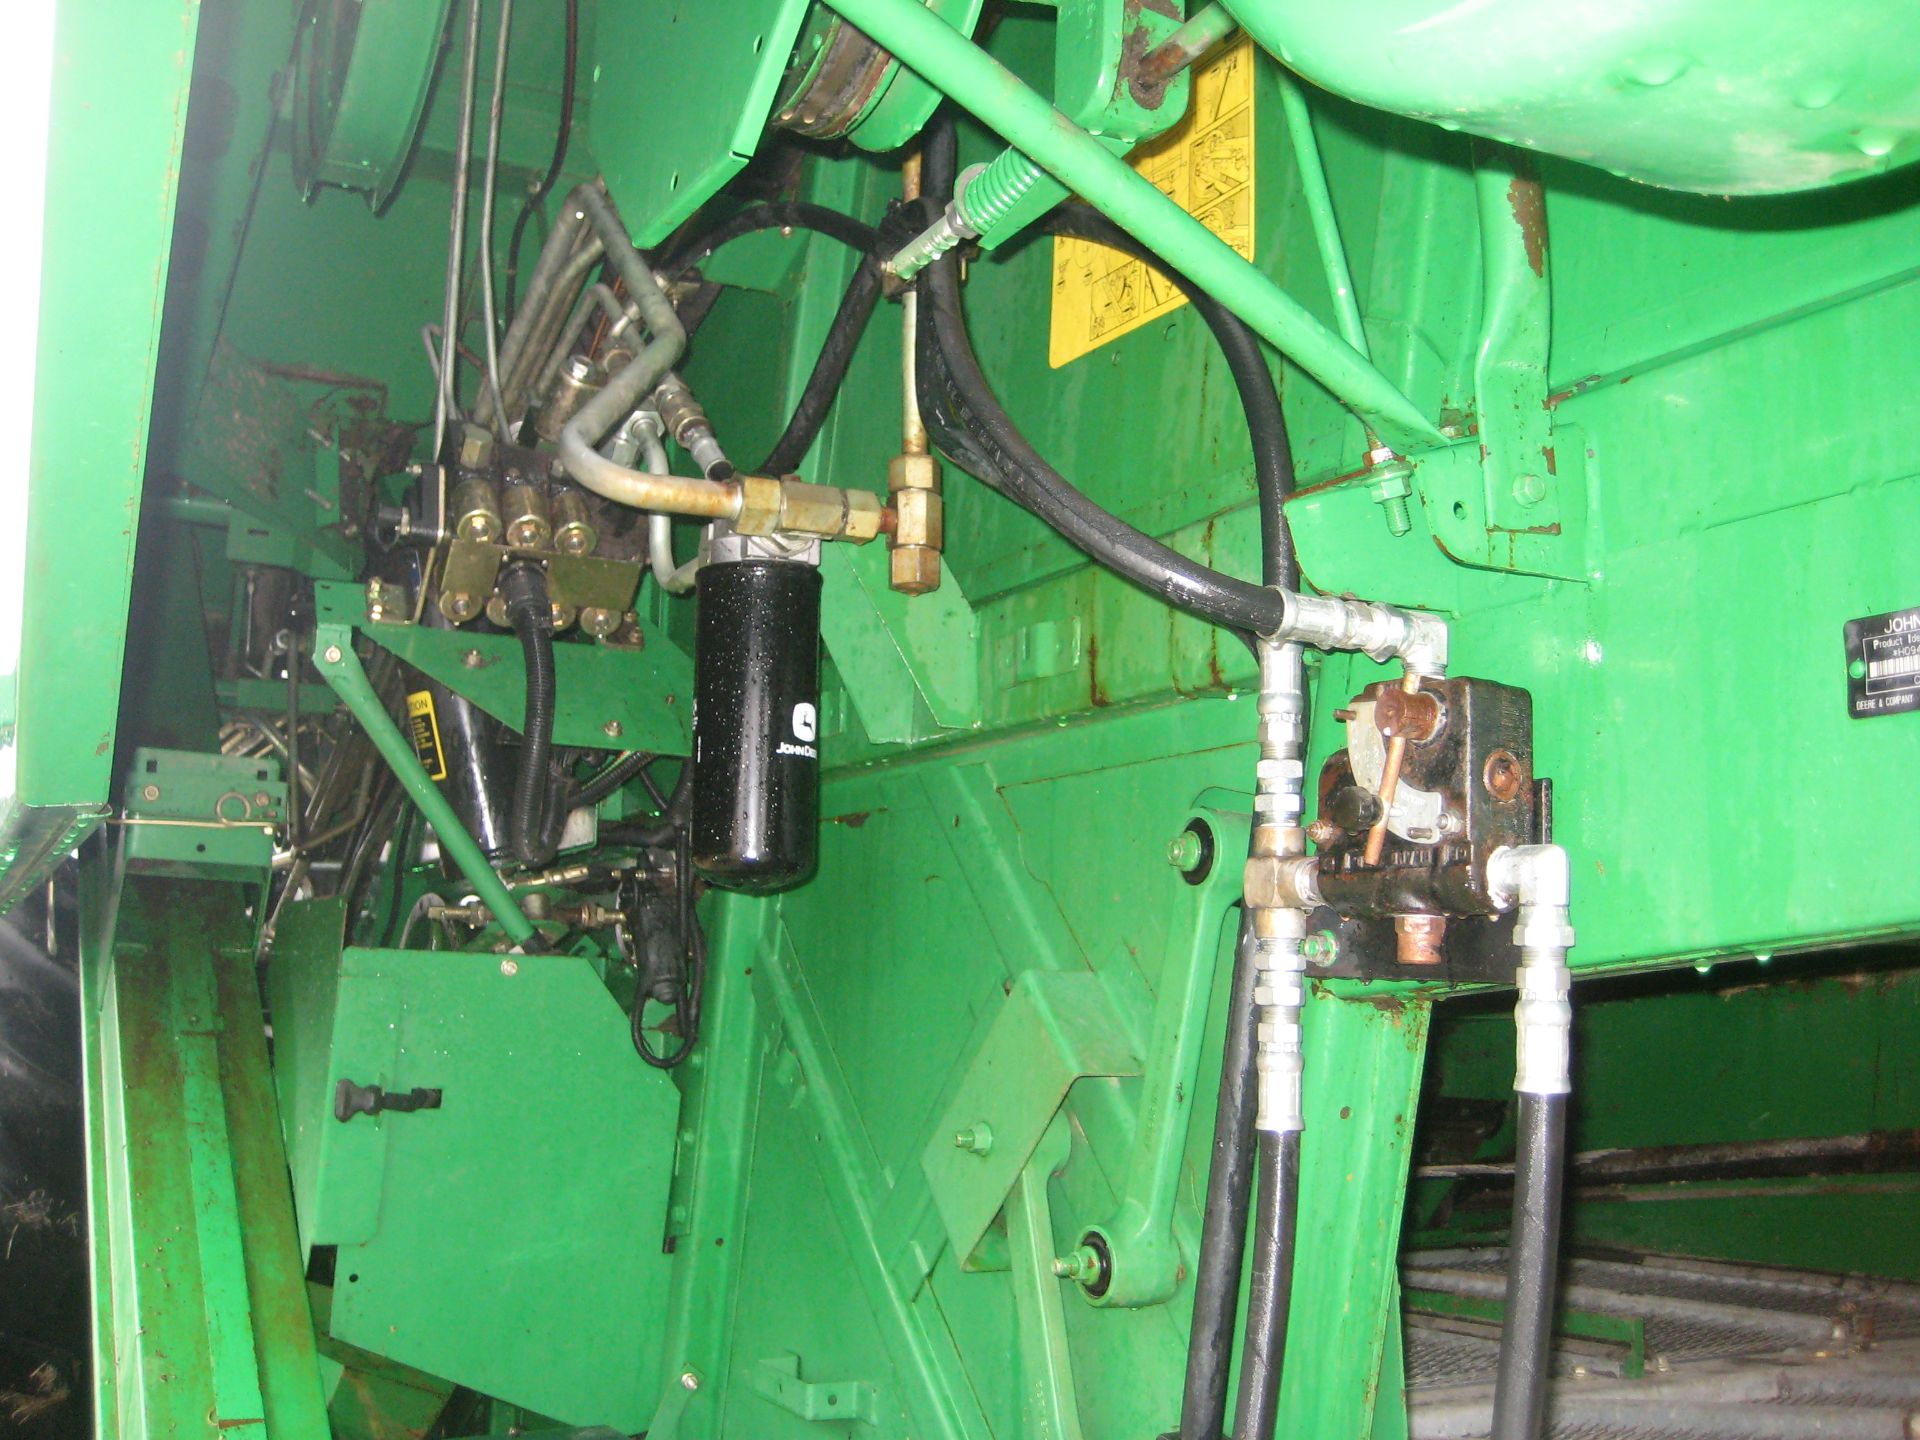 '97 JD 9400, 24.5x32, MAURER EXT., SHAFF SPREADER, WIRED FOR GREEN STAR, 3826/2826 HRS, SN-670541 - Image 12 of 28